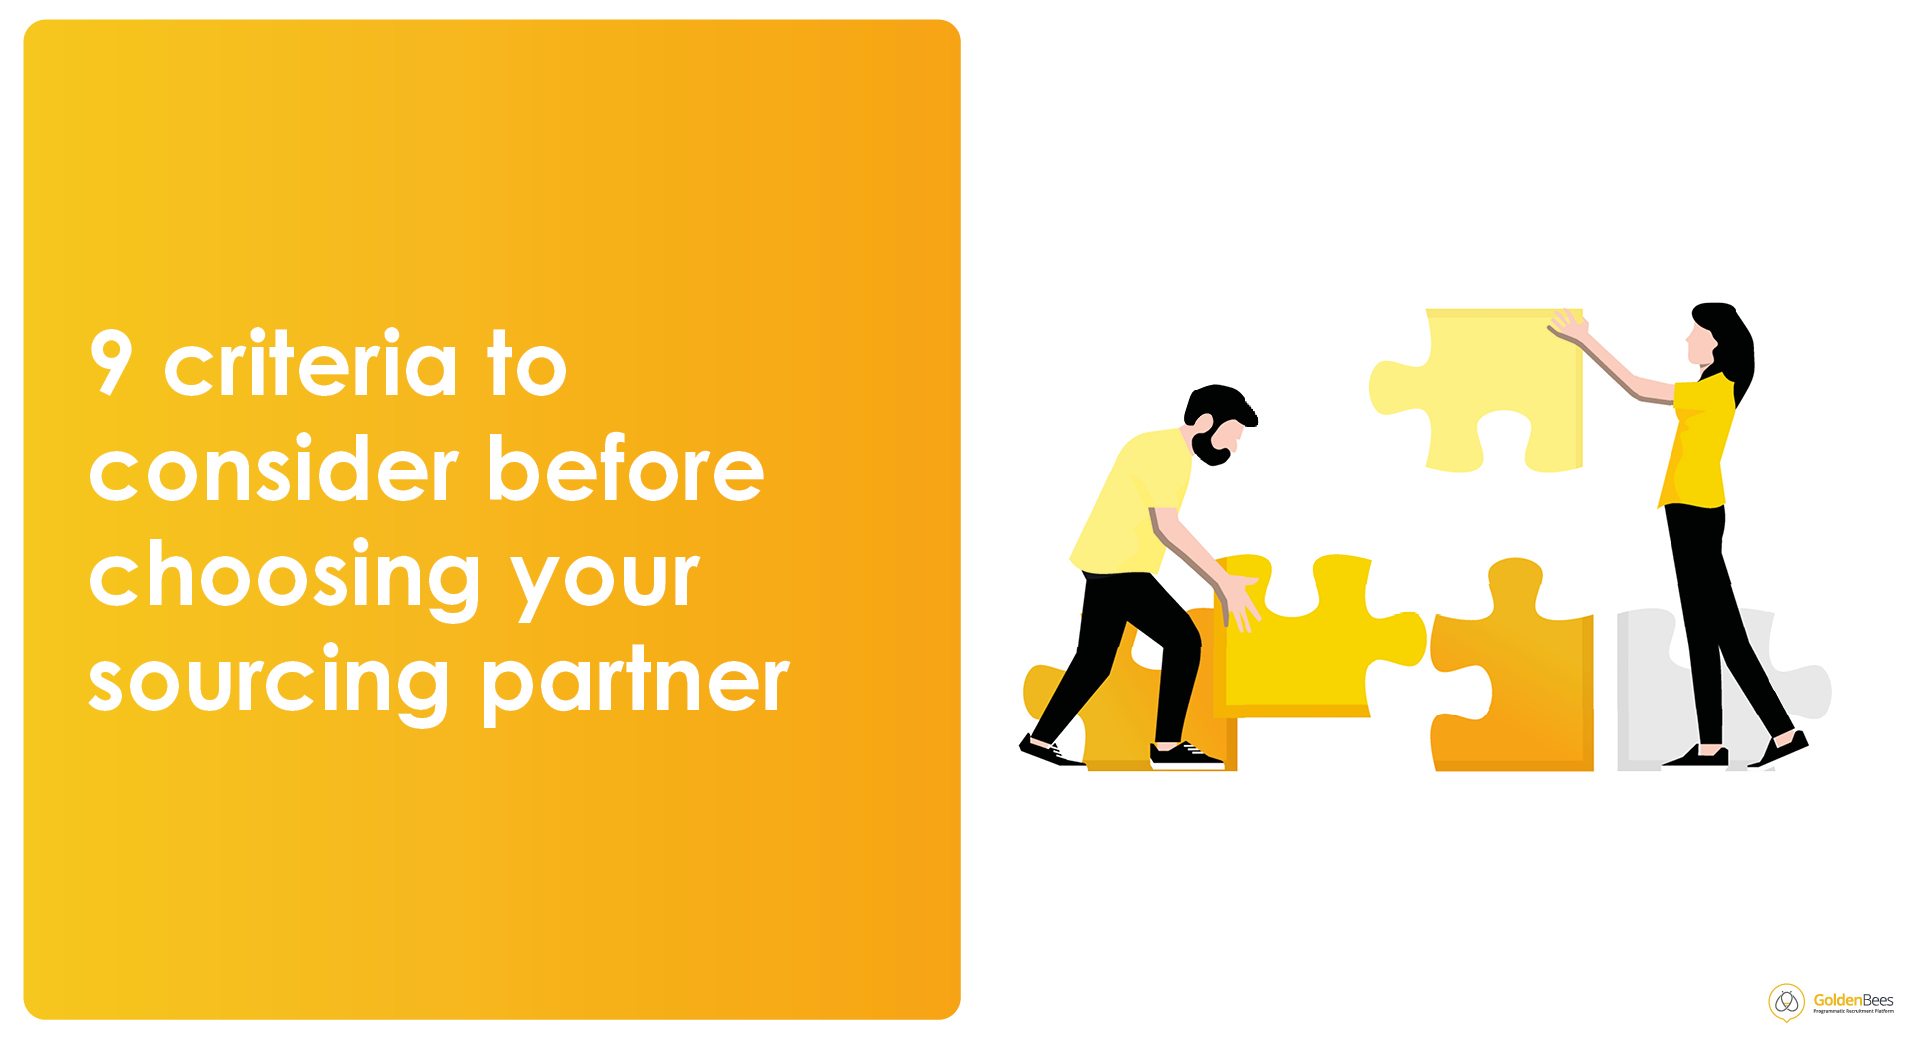 9 criteria to consider before choosing your sourcing partner